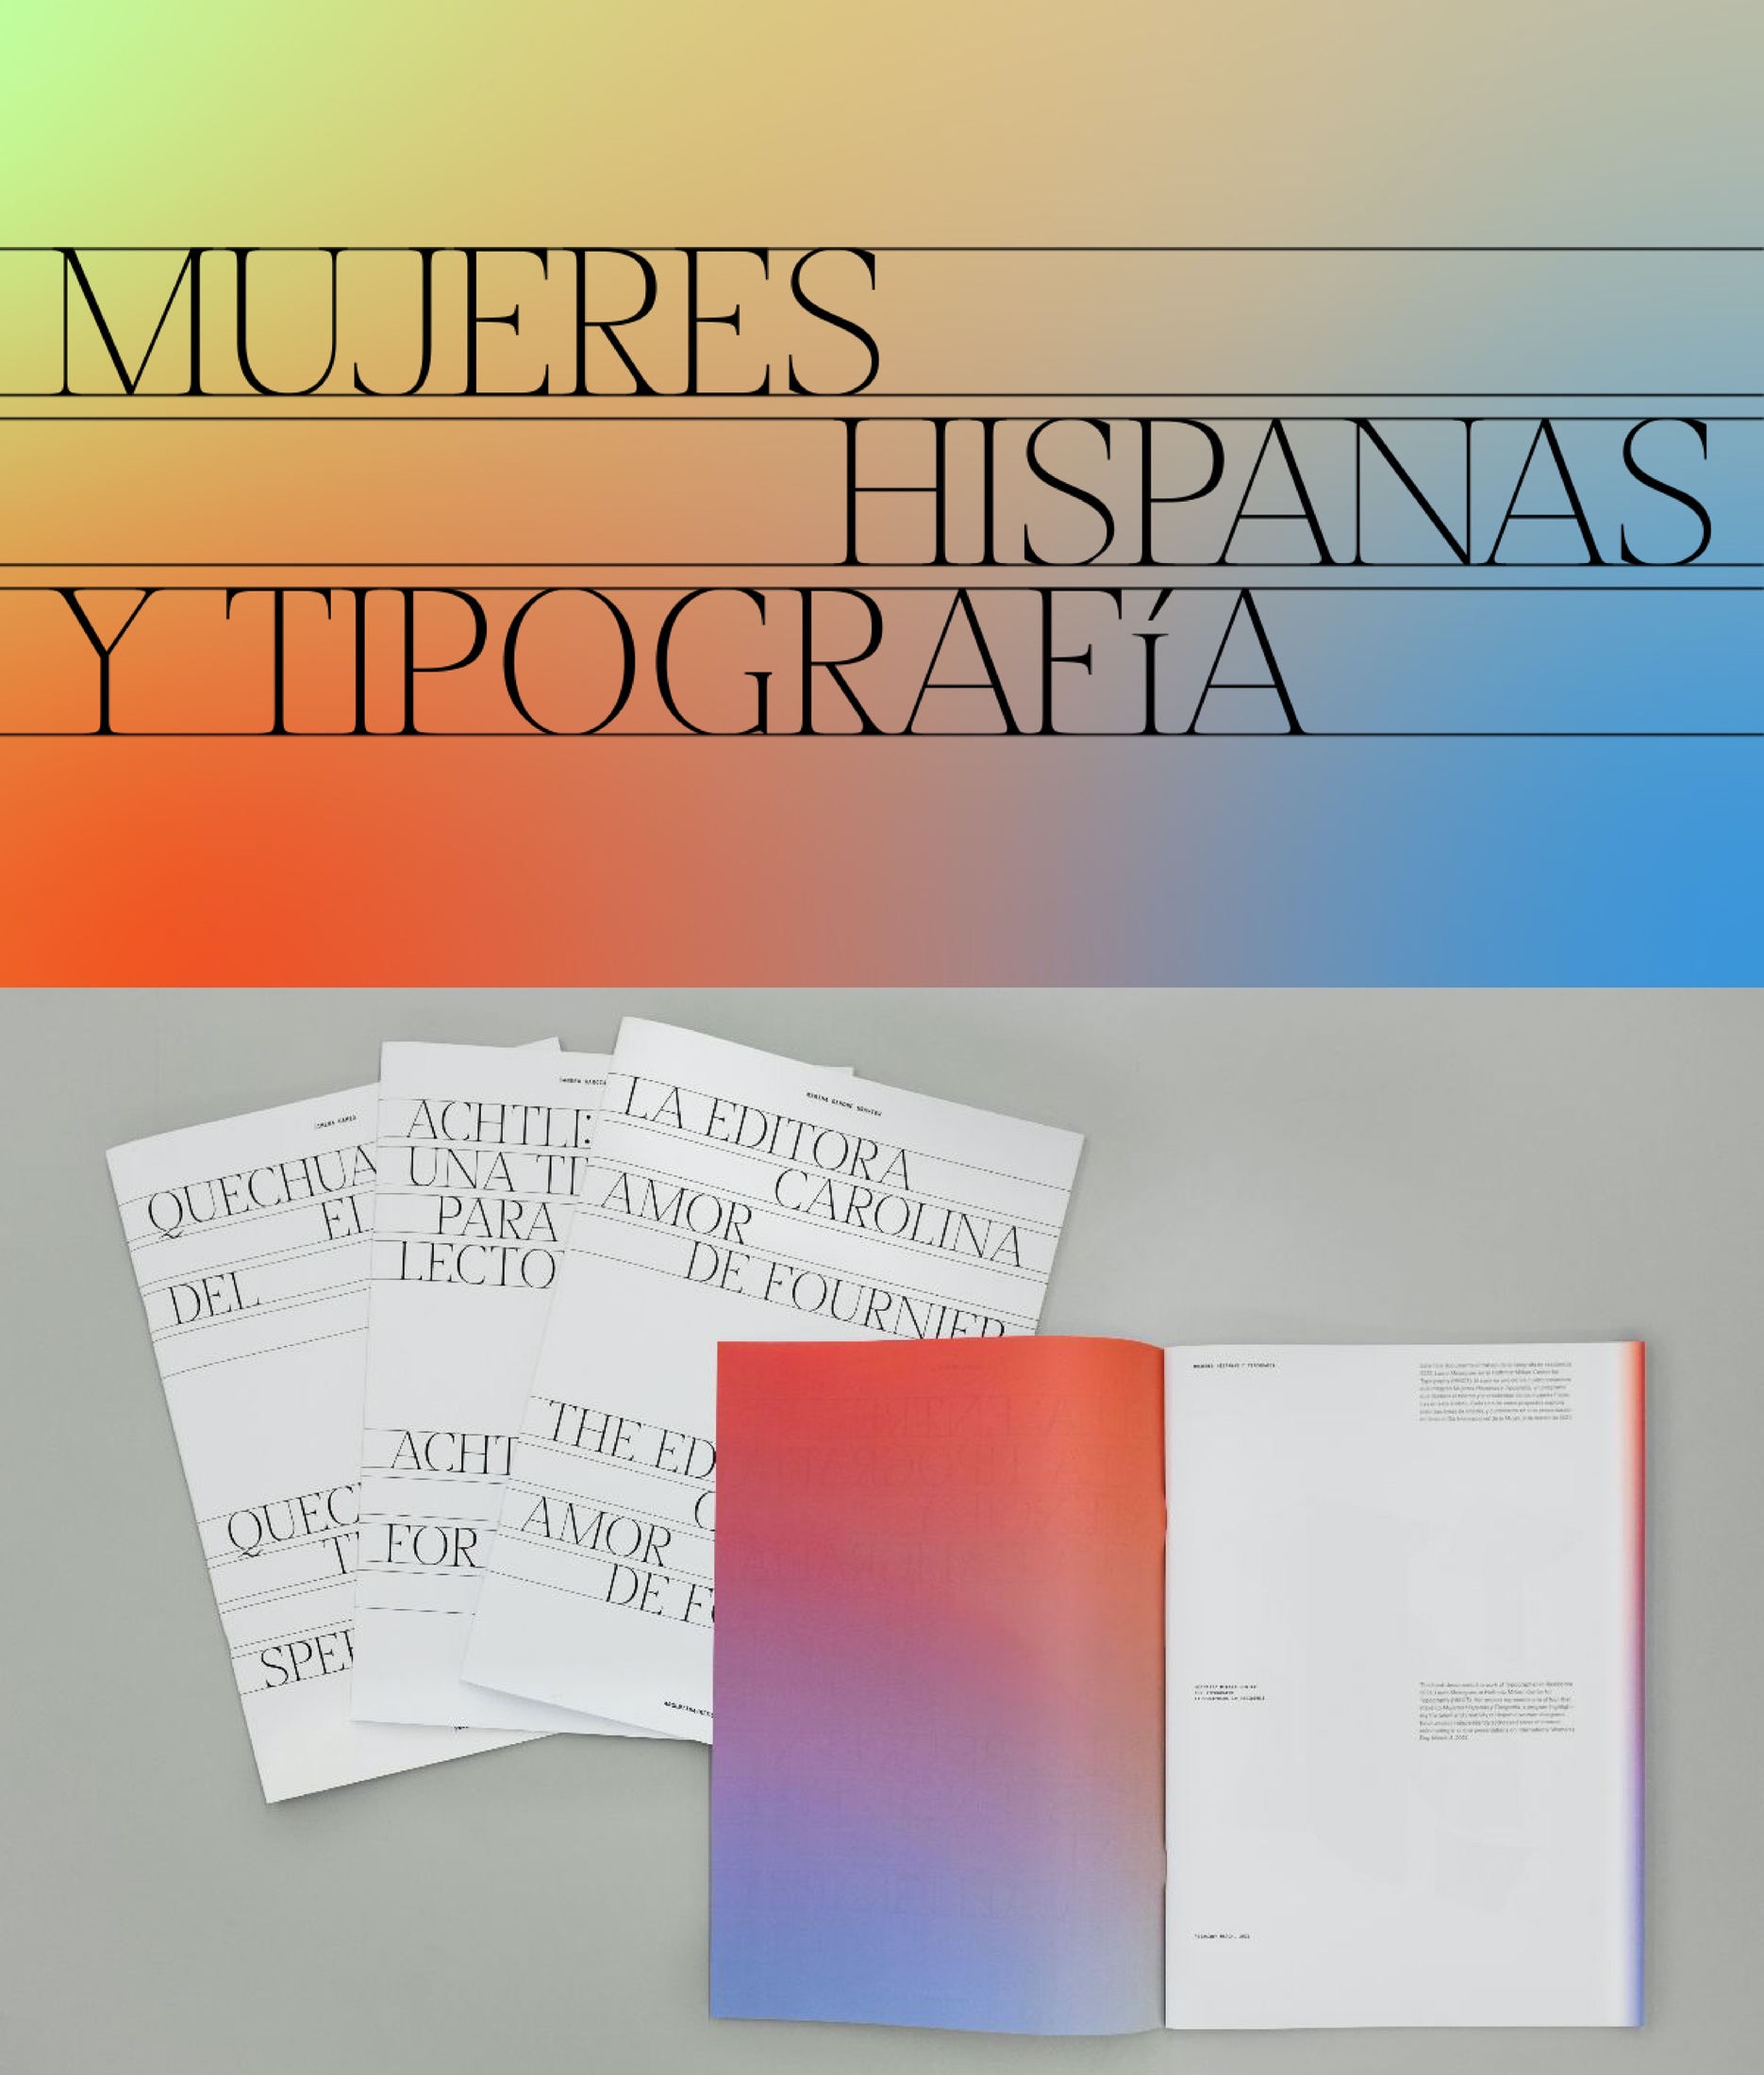 The Bilingual Catalog {Spanish and English] documenting the work of Typographers-in-Residence – five Hispanic women at HMCT, ArtCenter College of Design..